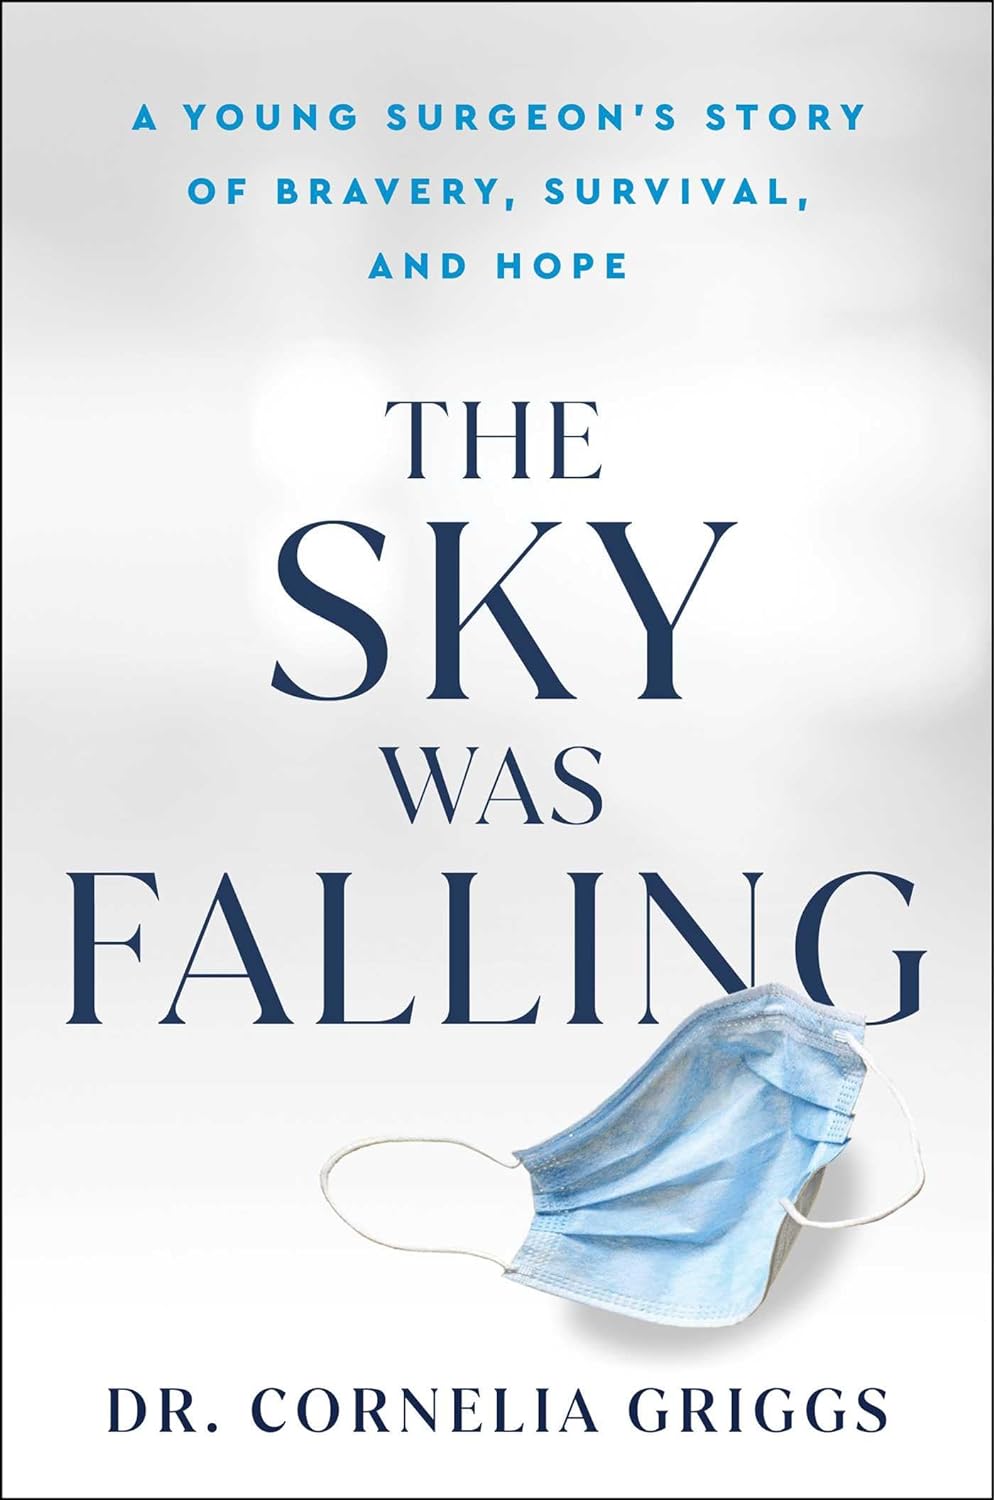 The Title The Sky Is Falling is seen in black letters against a white and grey background with a blue surgical mask lying below it. author name below, Cornelia Griggs